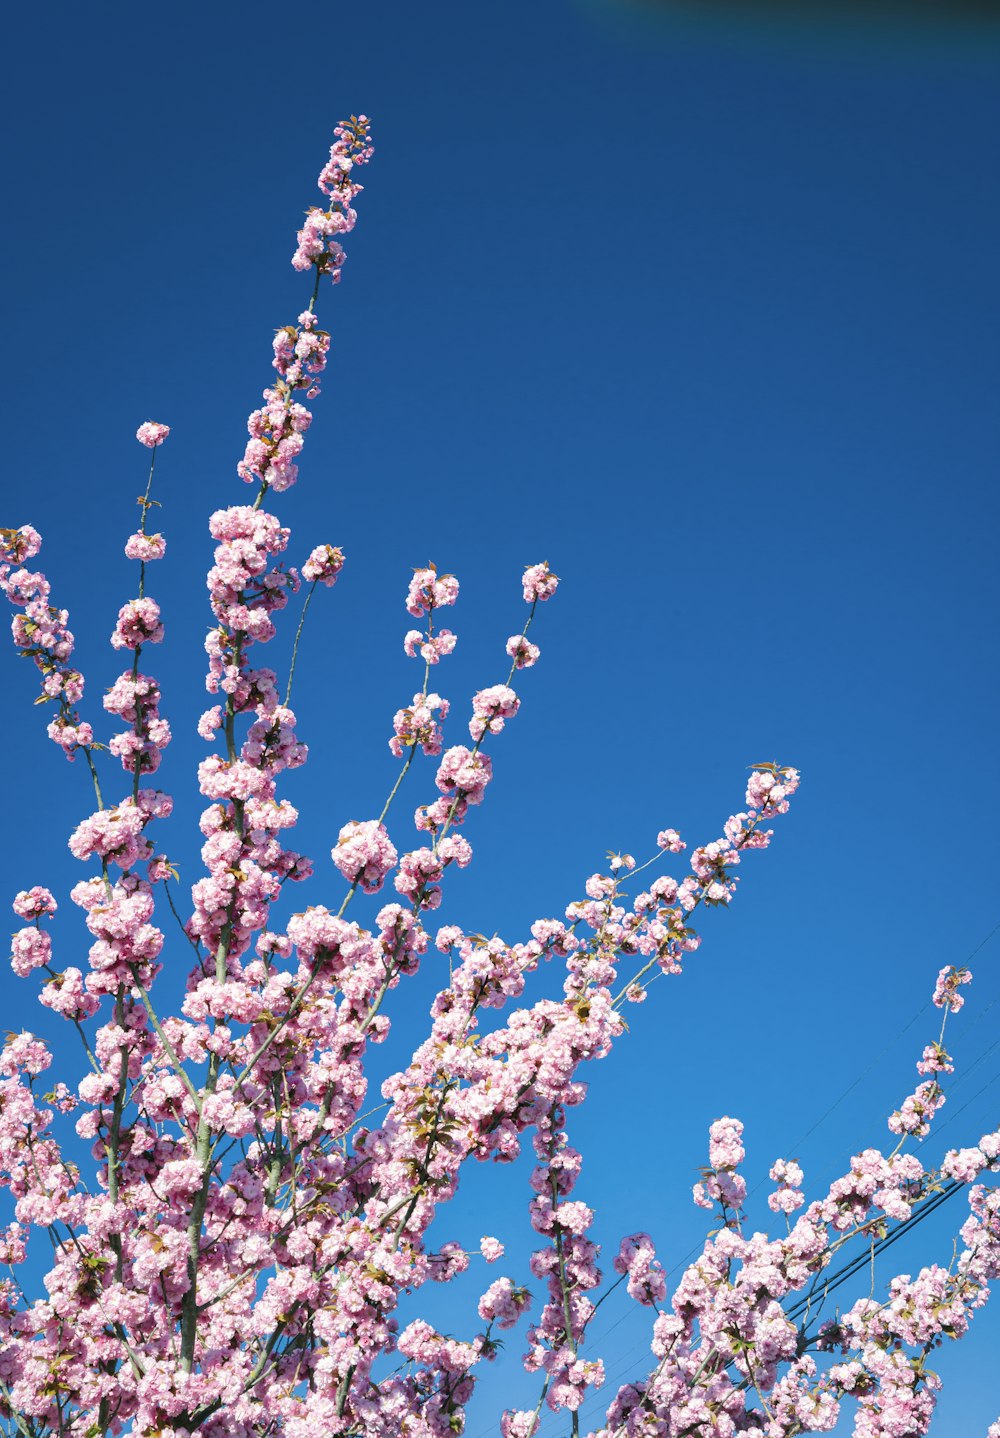 white and pink flower under blue sky during daytime